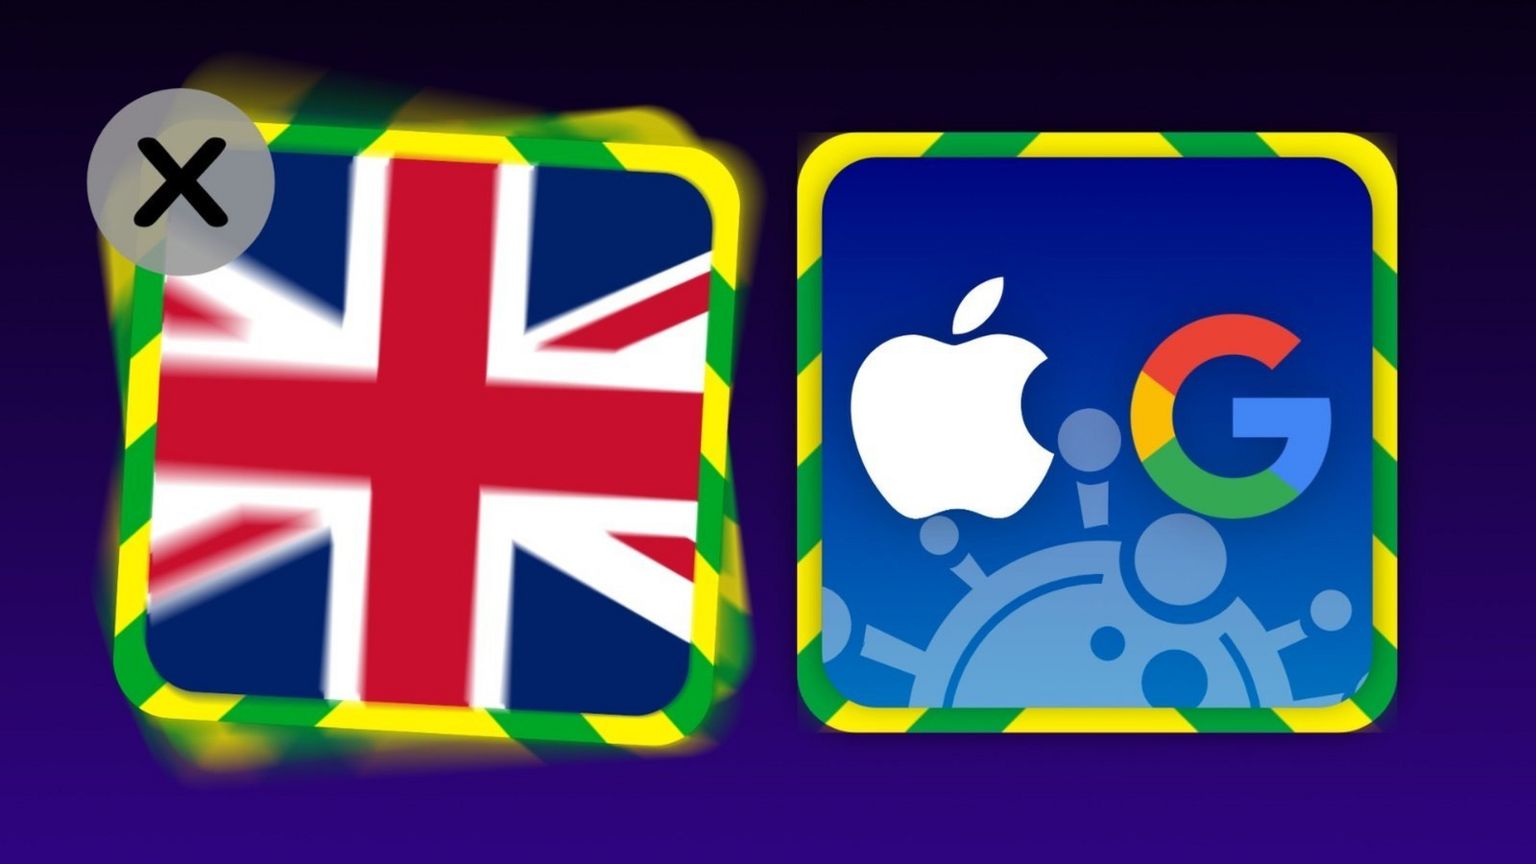 Graphic illustration showing a UK app icon next to an Apple/Google app